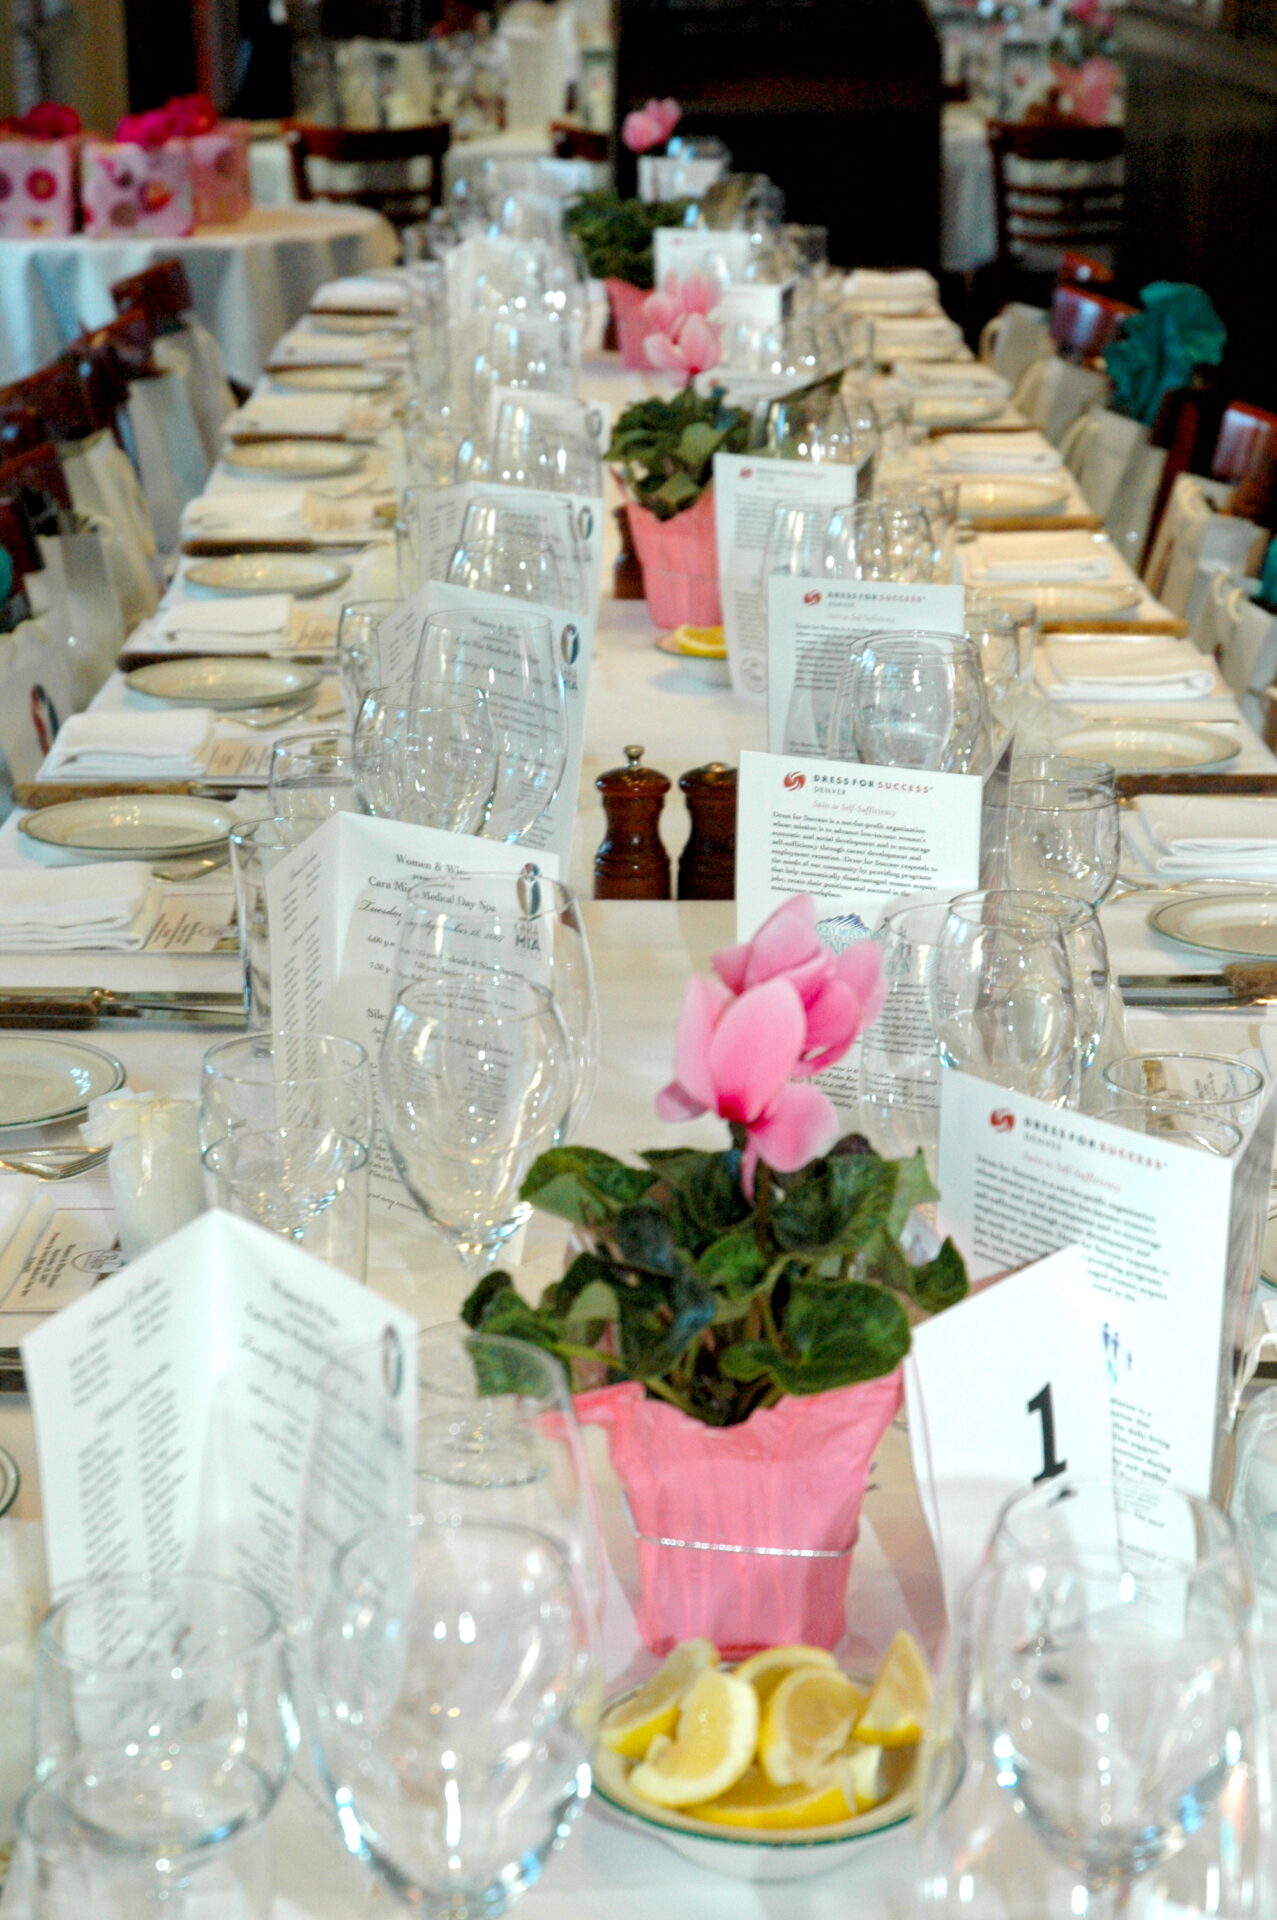 Table Set for Dining With Cutlery, Glassware and Wine Glasses